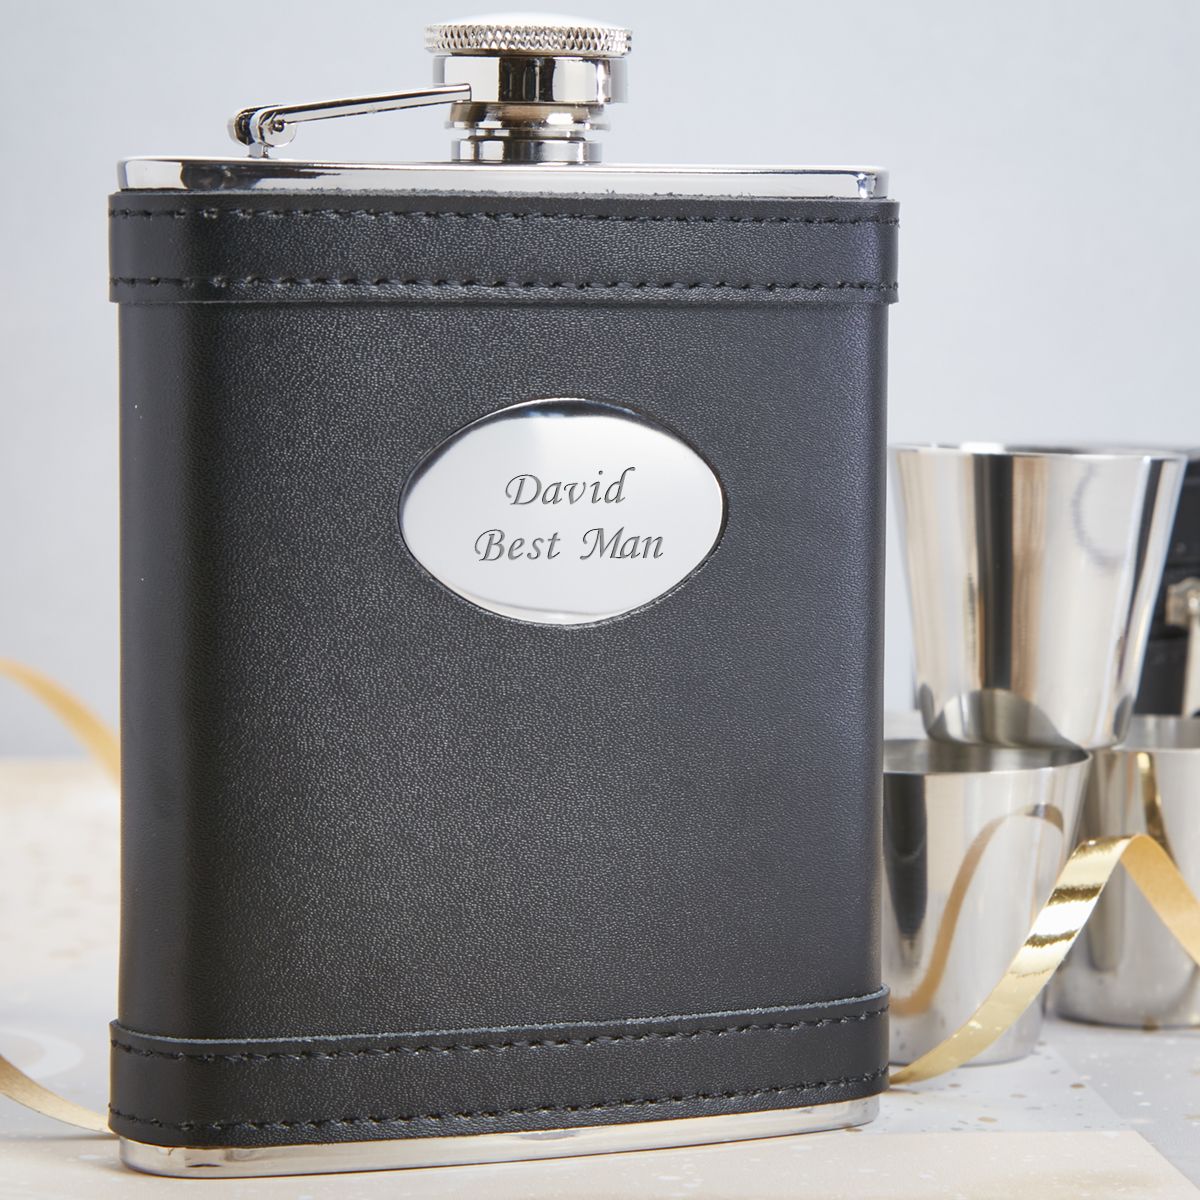 Father's Day Father of Bride Personalised Engraved Cigar Case Holder & Hip Flask Gift Usher Groomsman Wedding Gift Best Man Groom